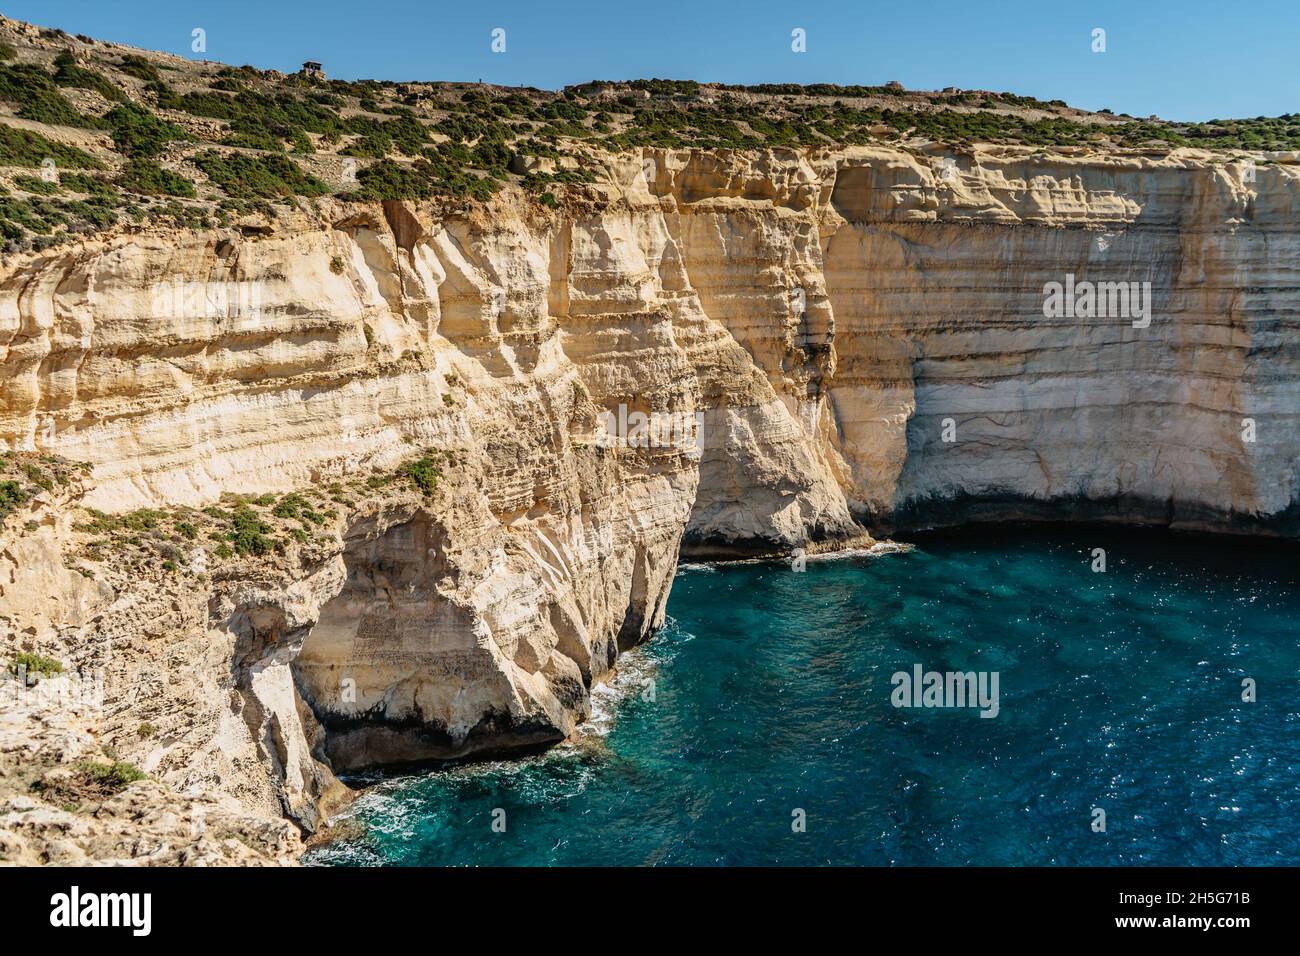 Rocky limestone coastline of Gozo island and Mediterranean Sea with turquoise blue water and caves.Great spot for hiking along Maltese coast.Popular Stock Photo